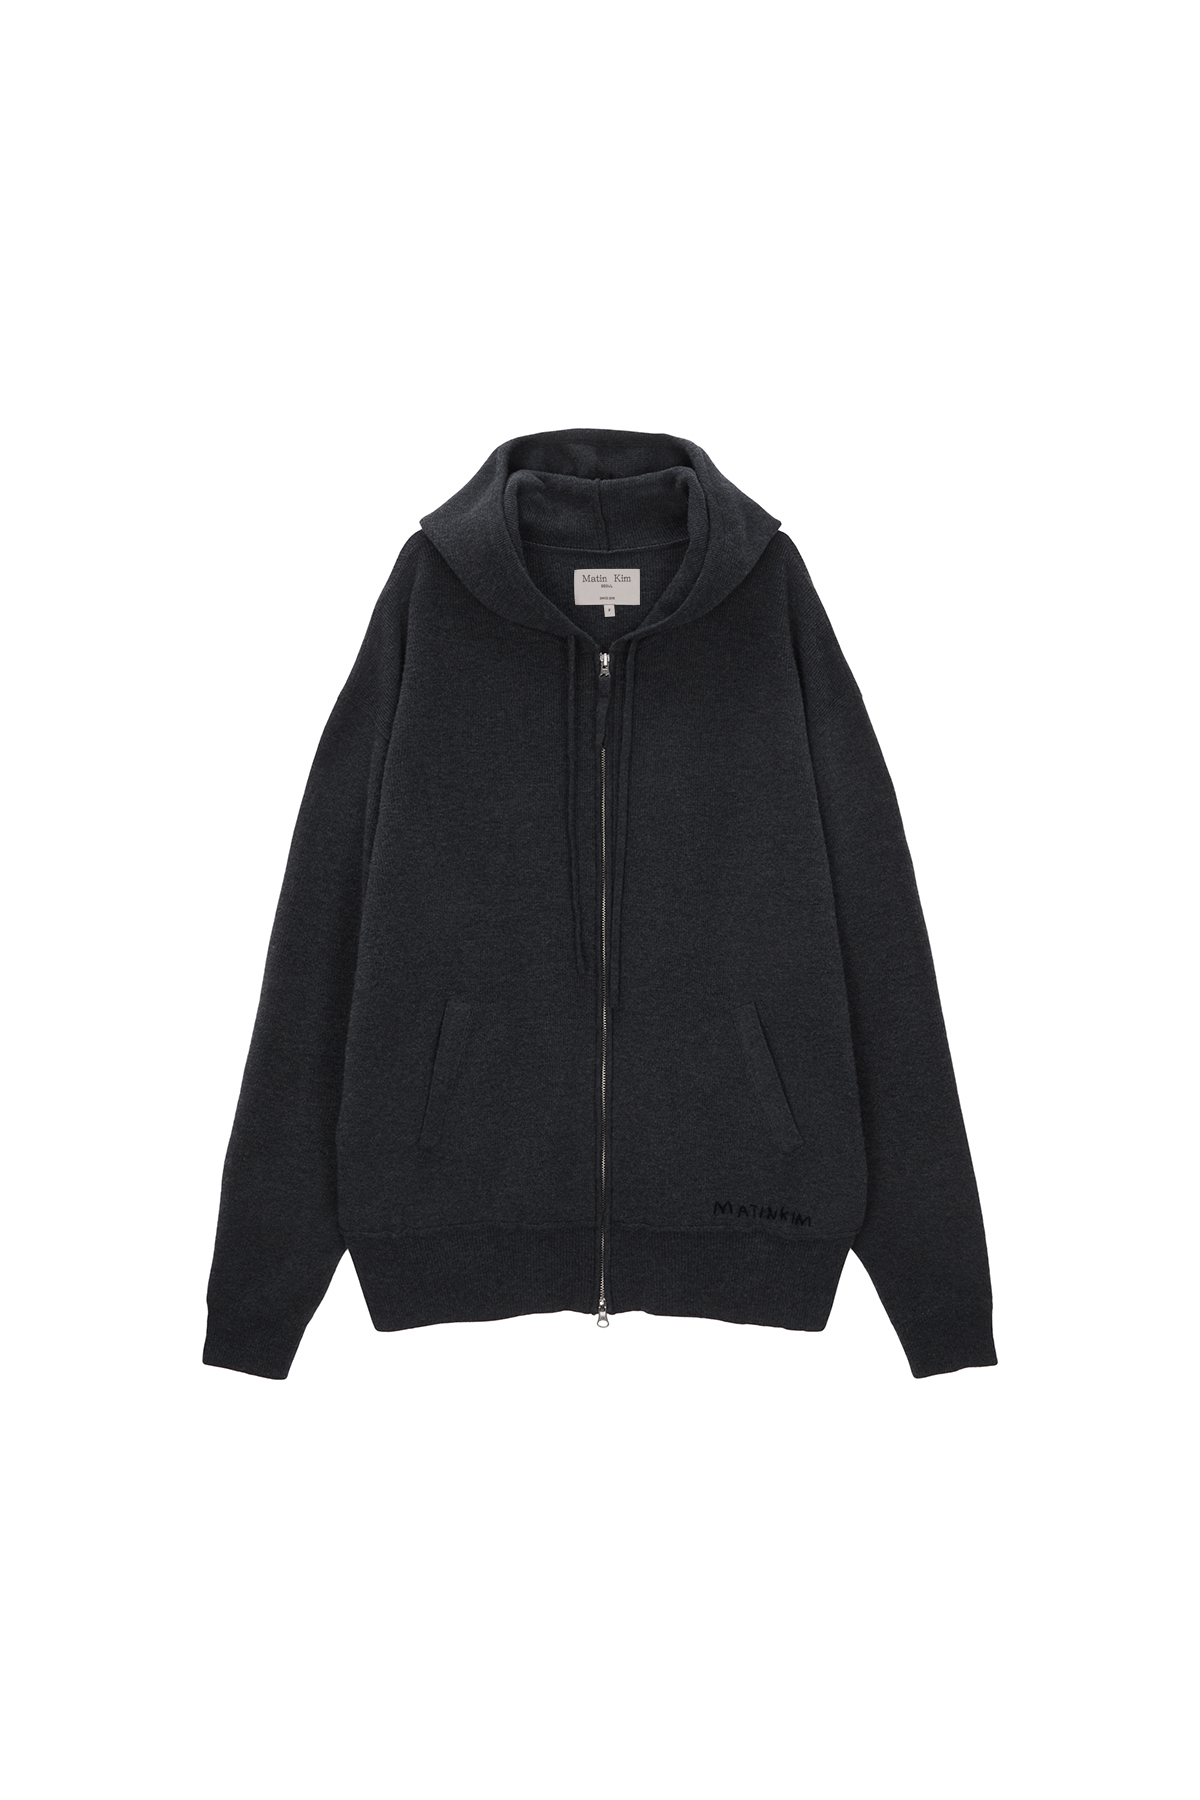 RIBBED KNIT HOODY ZIP UP FOR MEN IN CHARCOAL